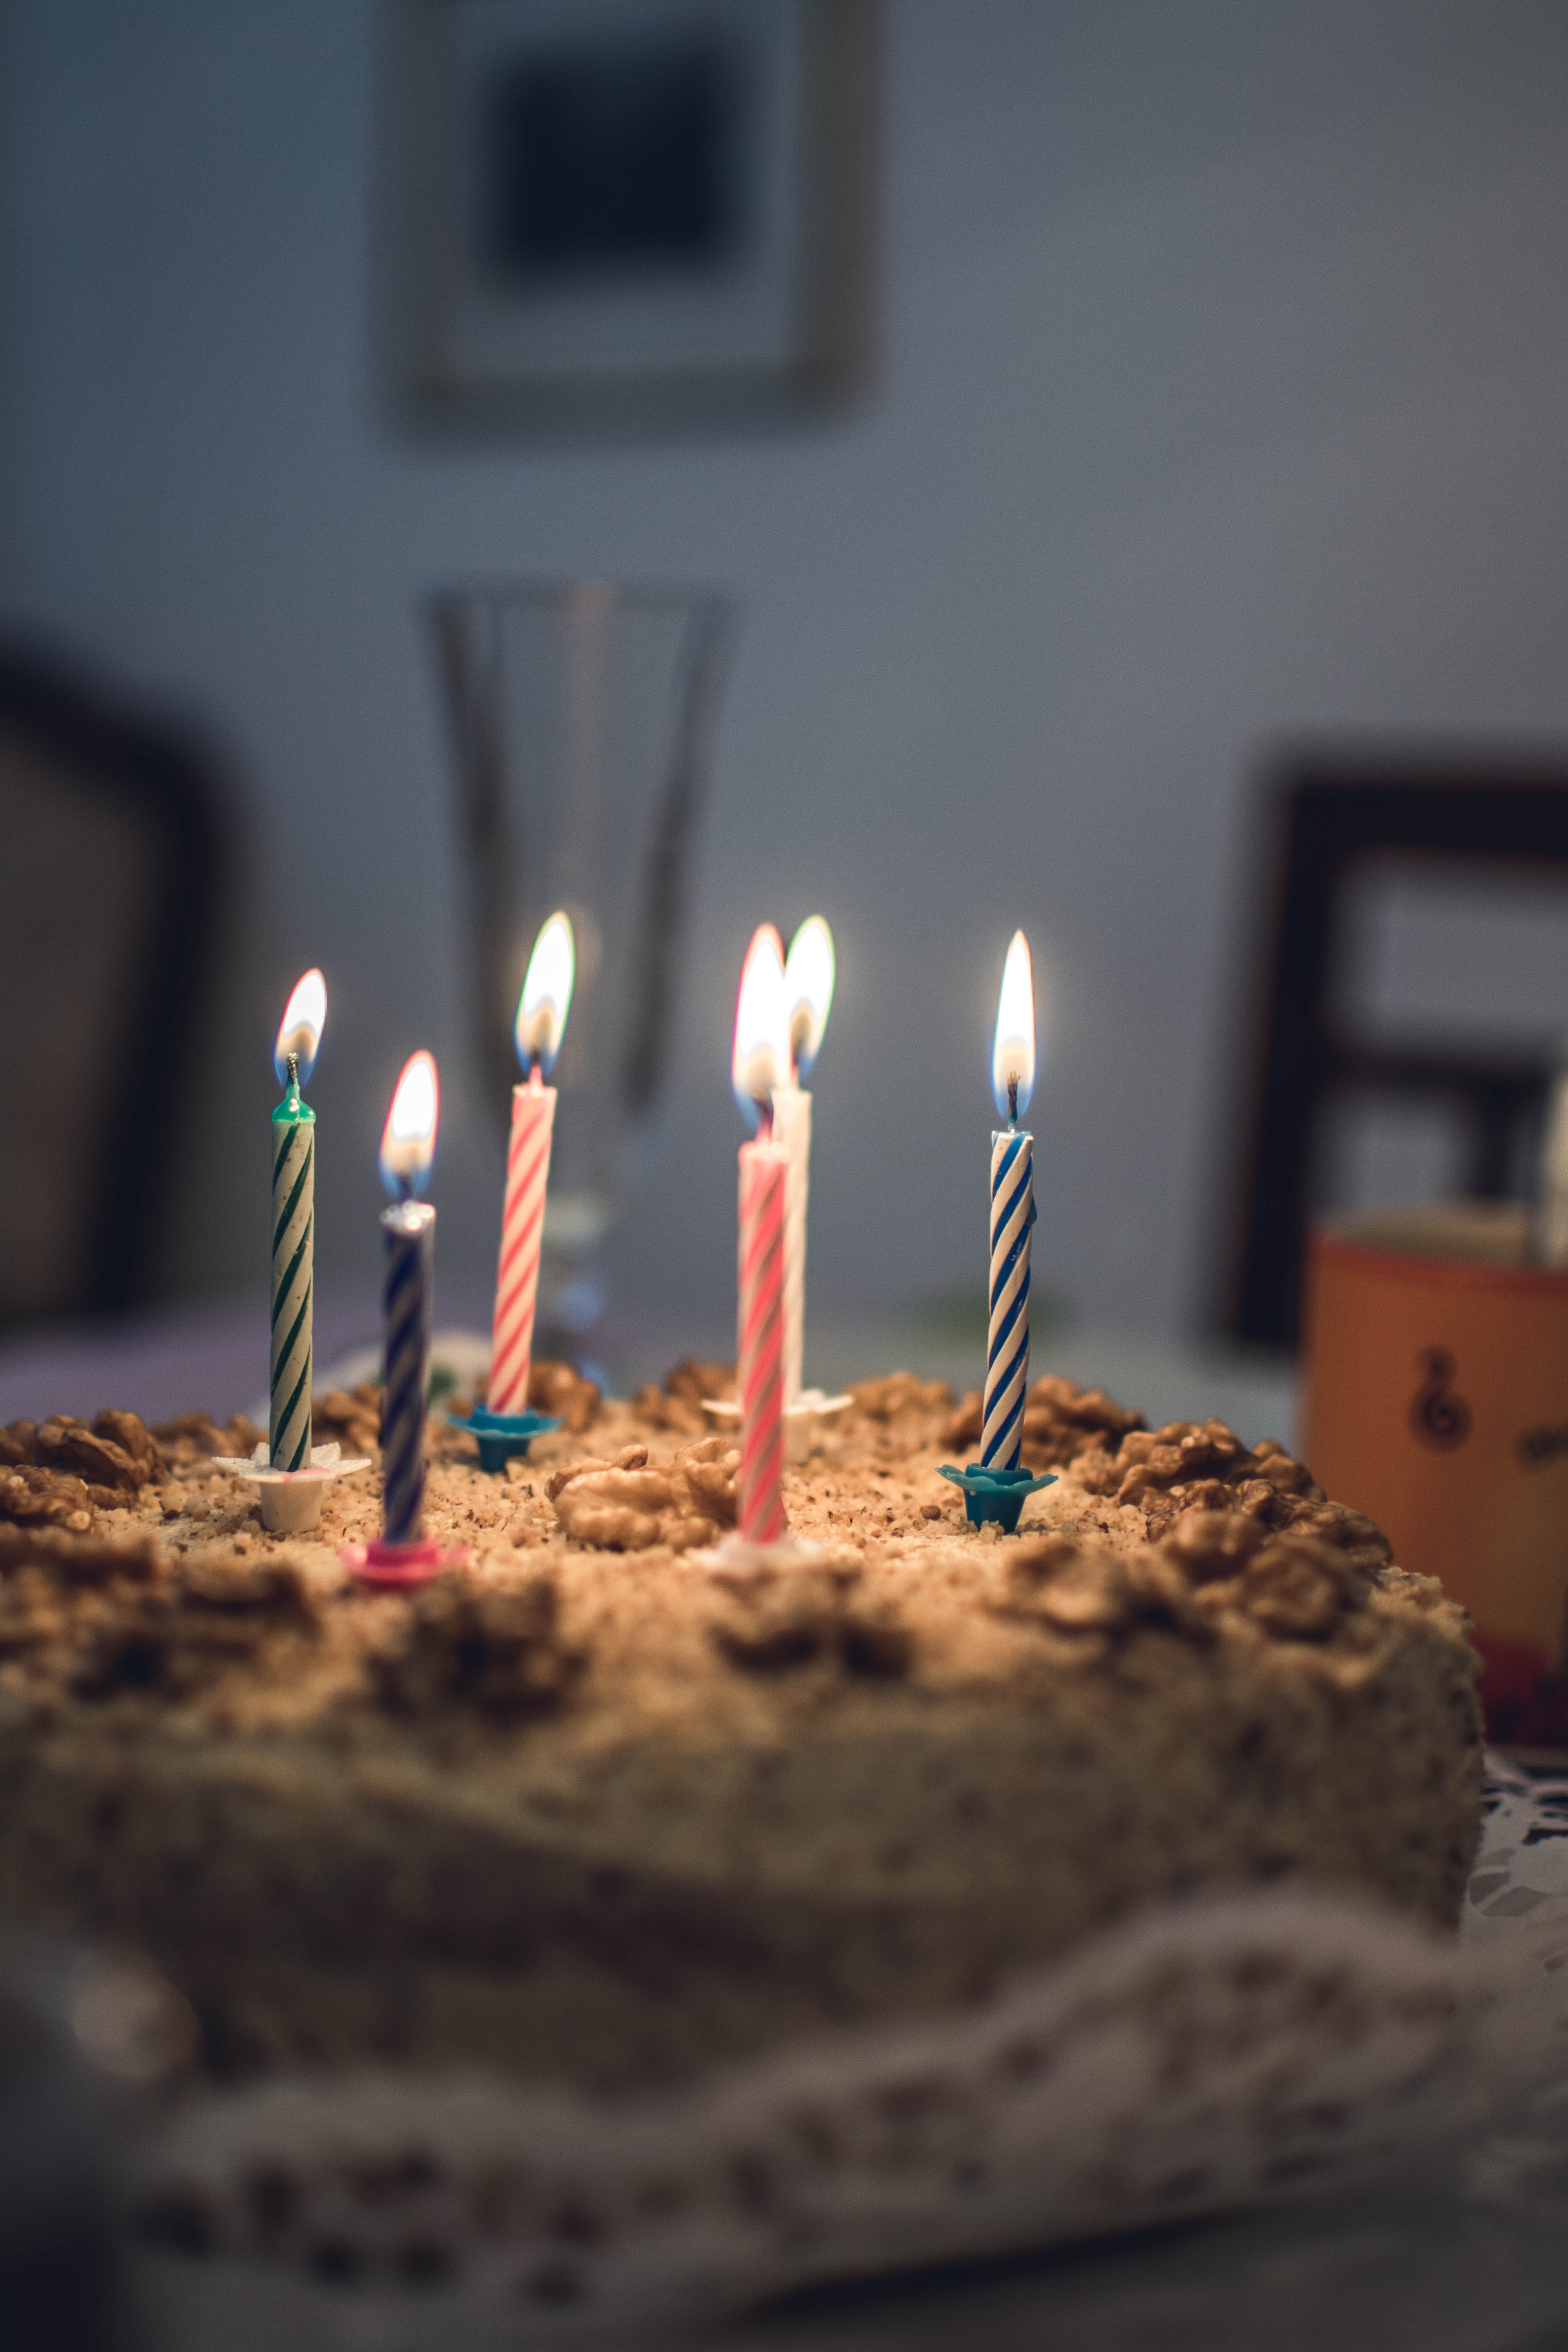 A cake with lighted candles | Source: Pexels